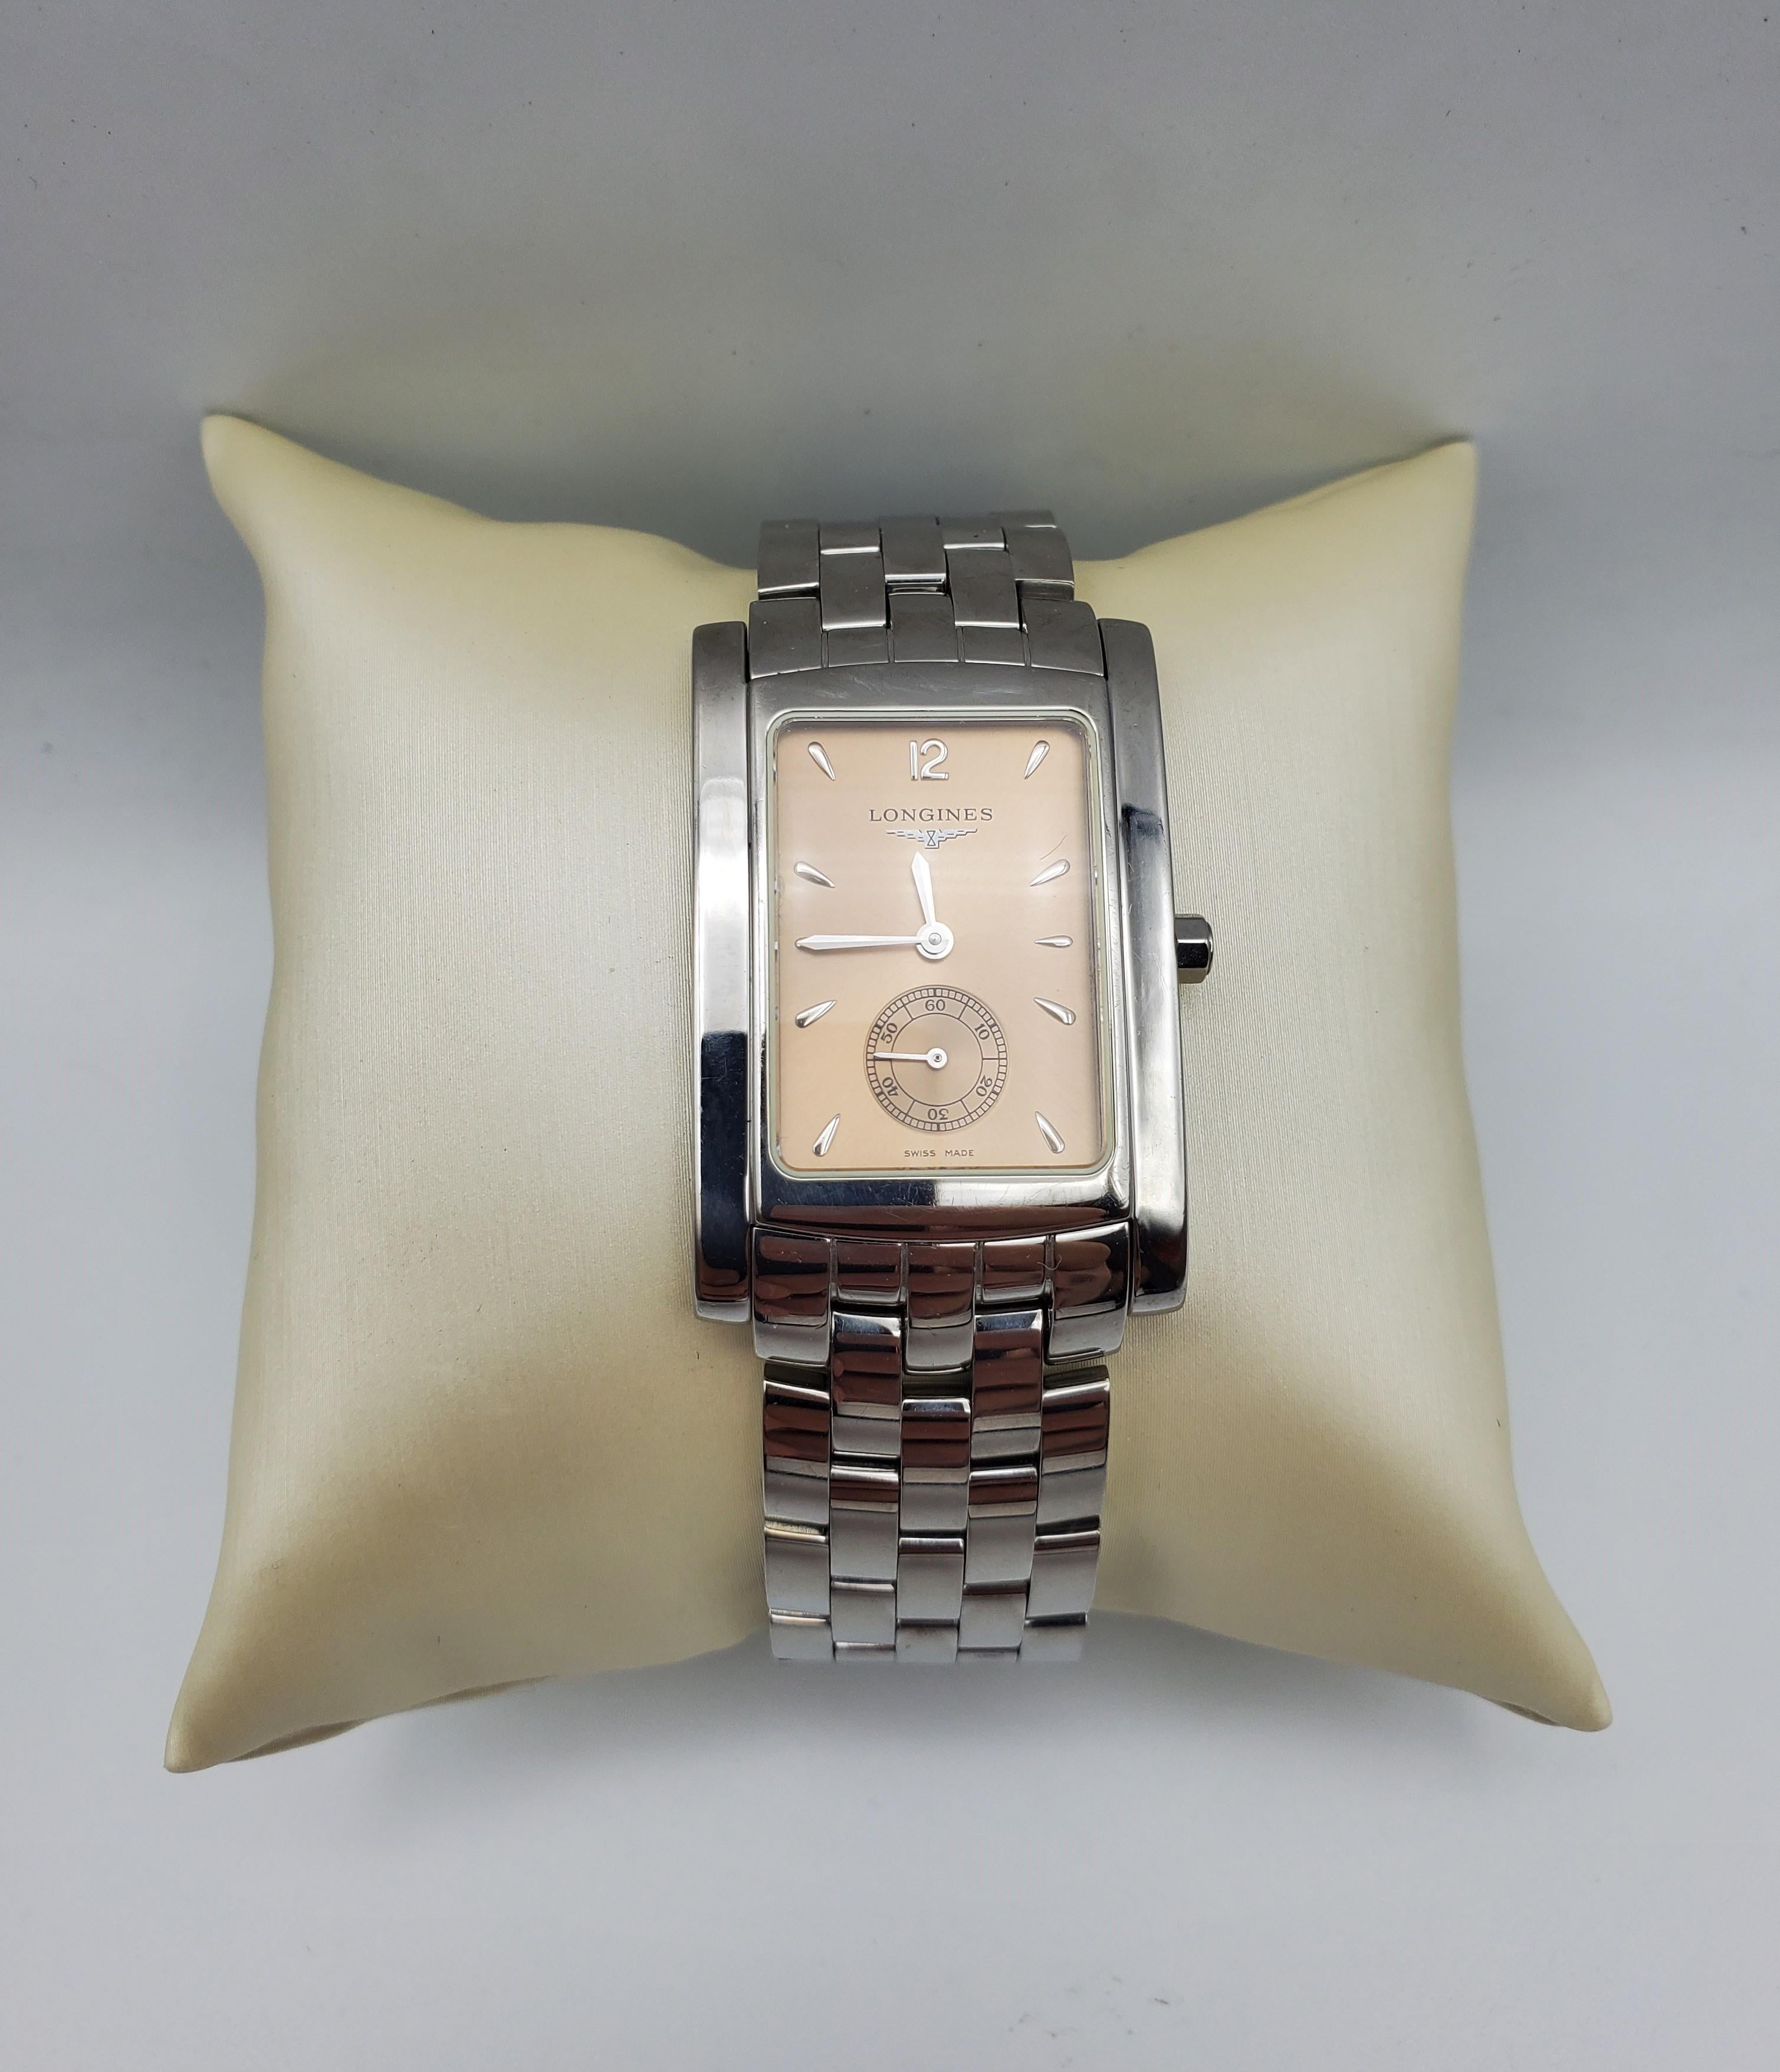 Longines Dolce Vita Tank Watch, Quartz, Champagne/Peach Face, Stainless Steel, Swiss-Made. Like New Condition. Beautiful Champagne/Peach Face. Water resistant 30. The case  is 26mm by 39mm in diameter and 6.6mm thick. The bracelet has a 20mm lug,